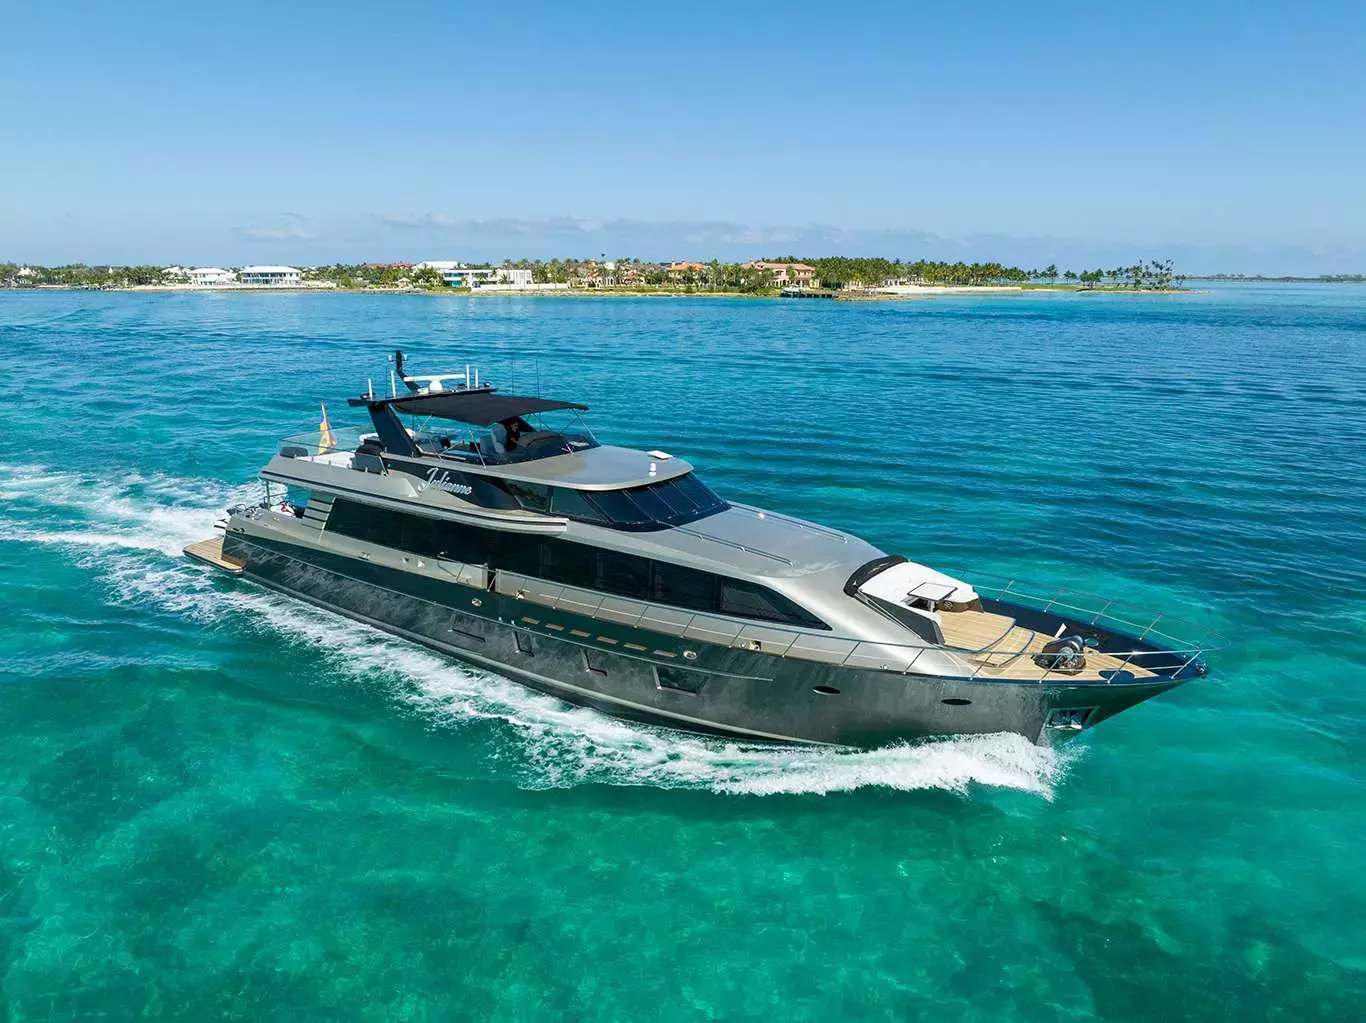 Julianne by Crescent Yachts - Special Offer for a private Motor Yacht Charter in Abacos with a crew